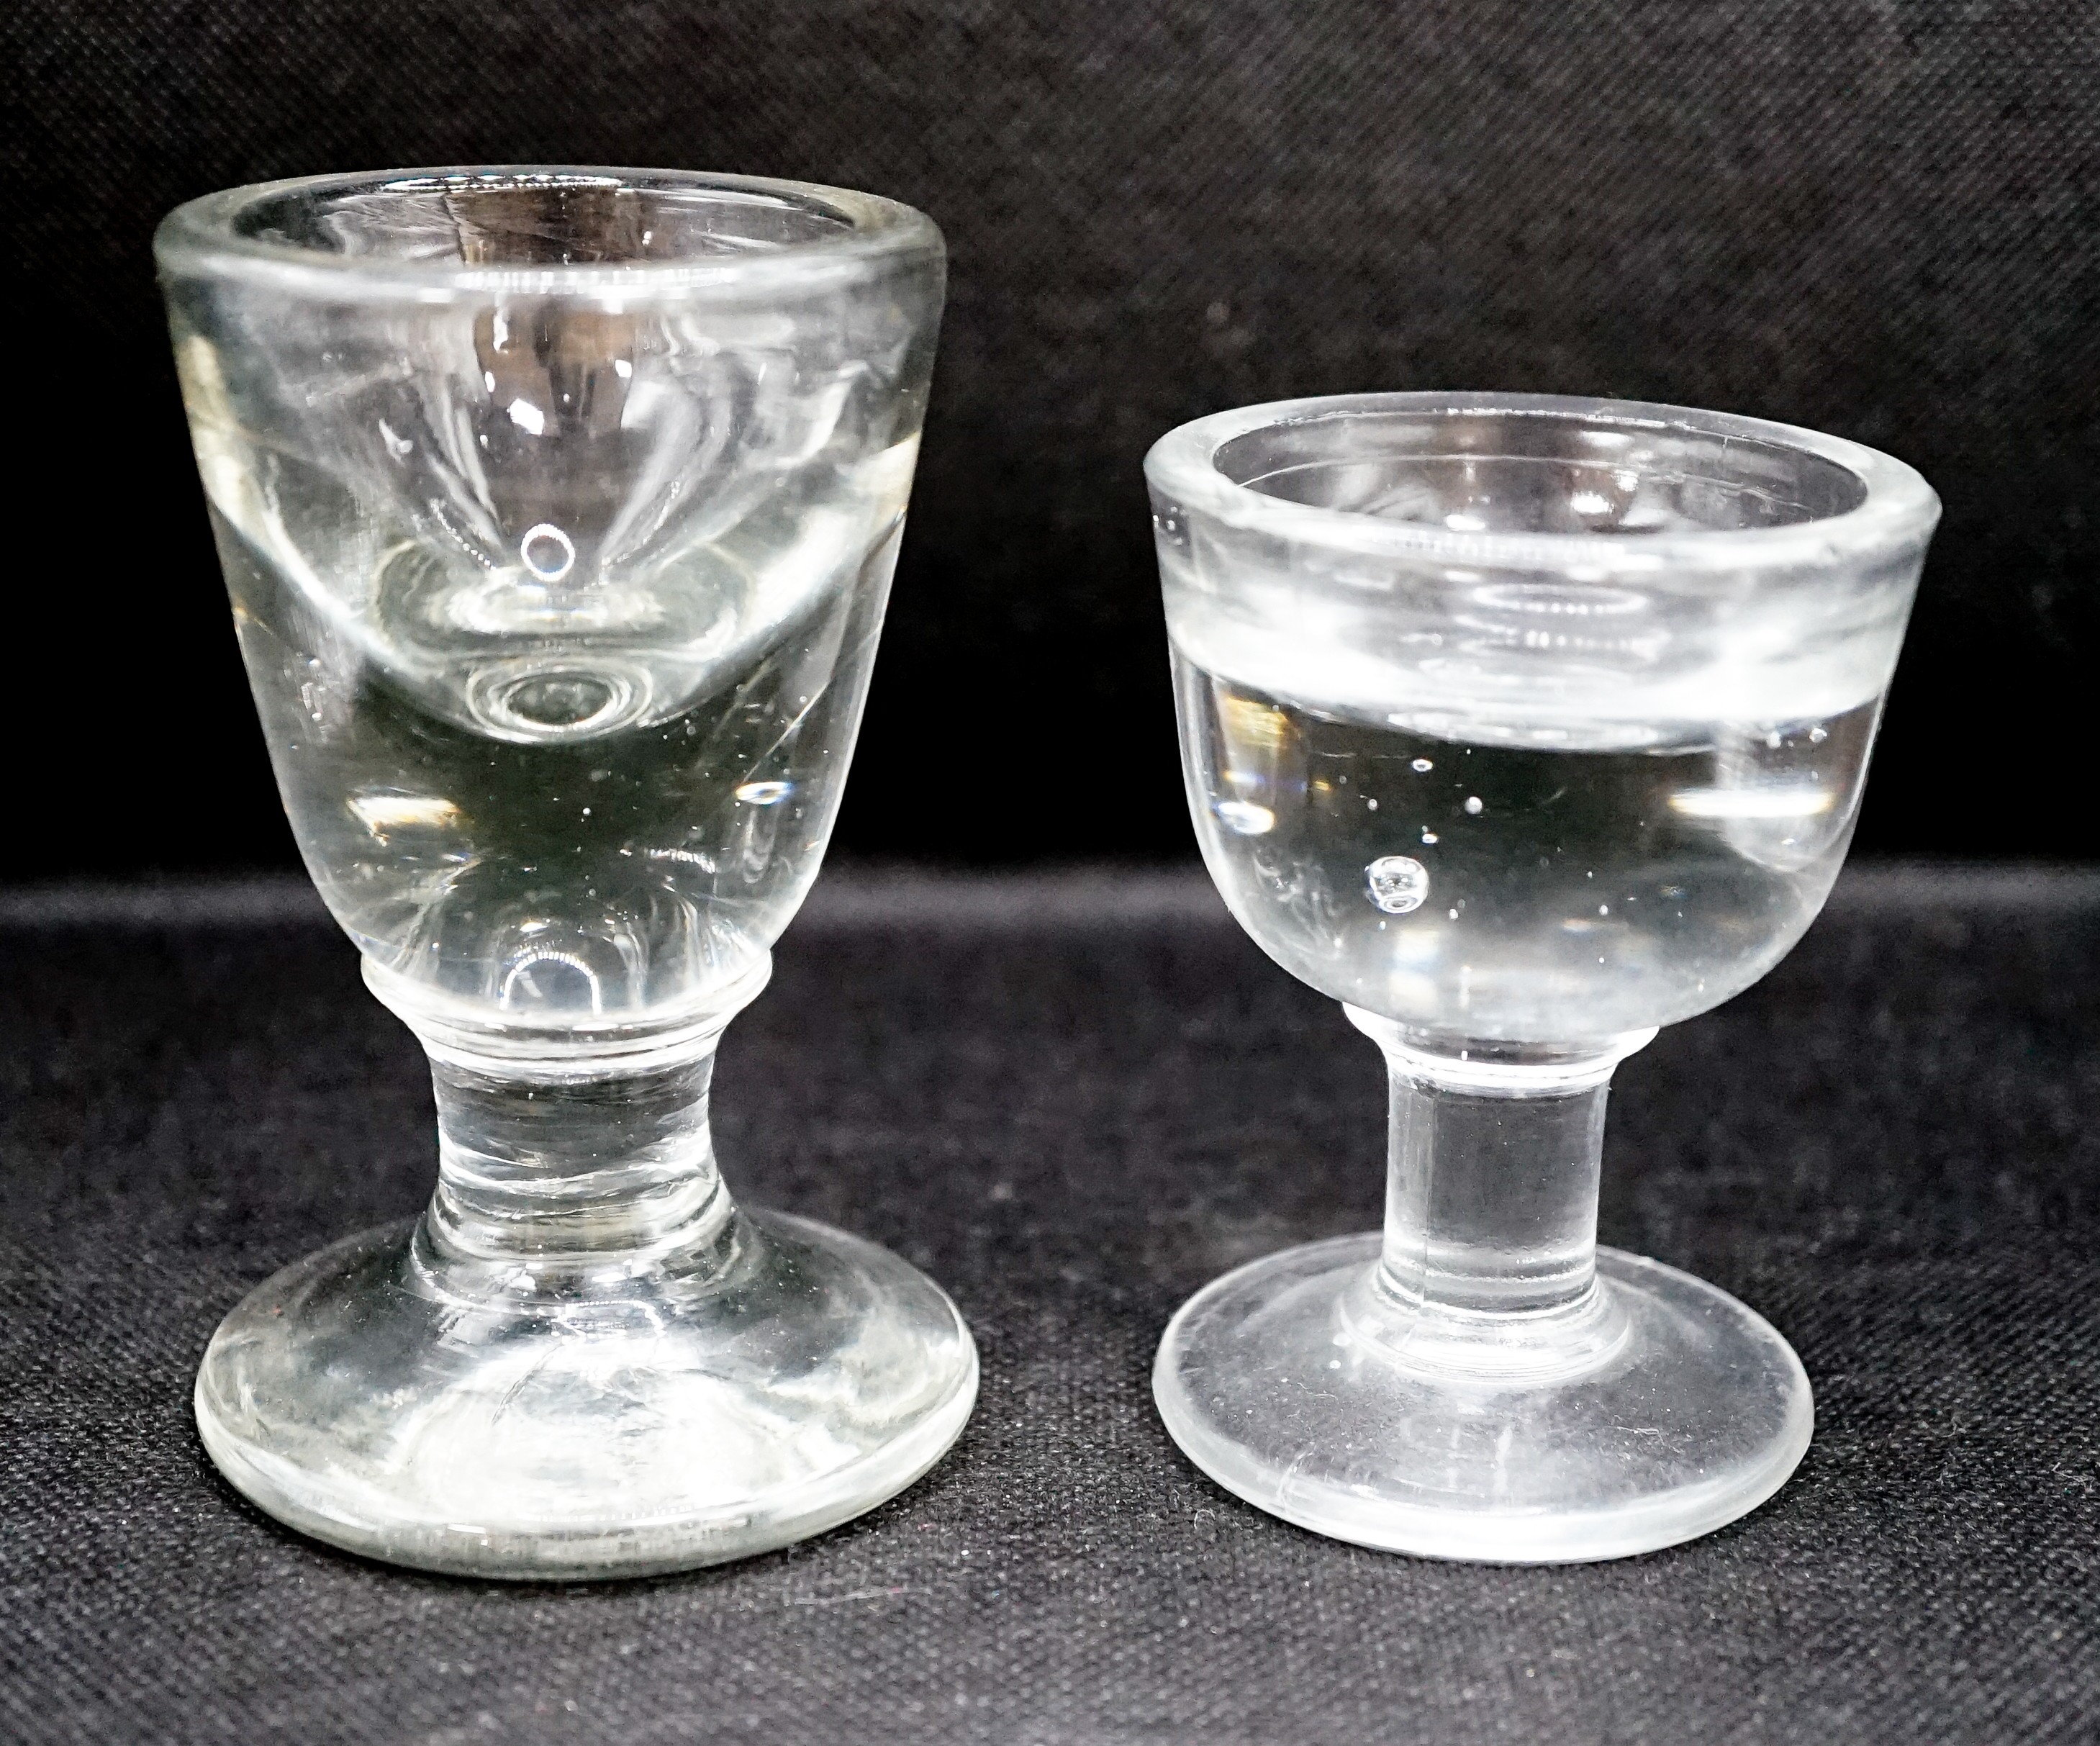 A Georgian deceptive Toastmasters glass and a later penny lick type glass, tallest 10 cm